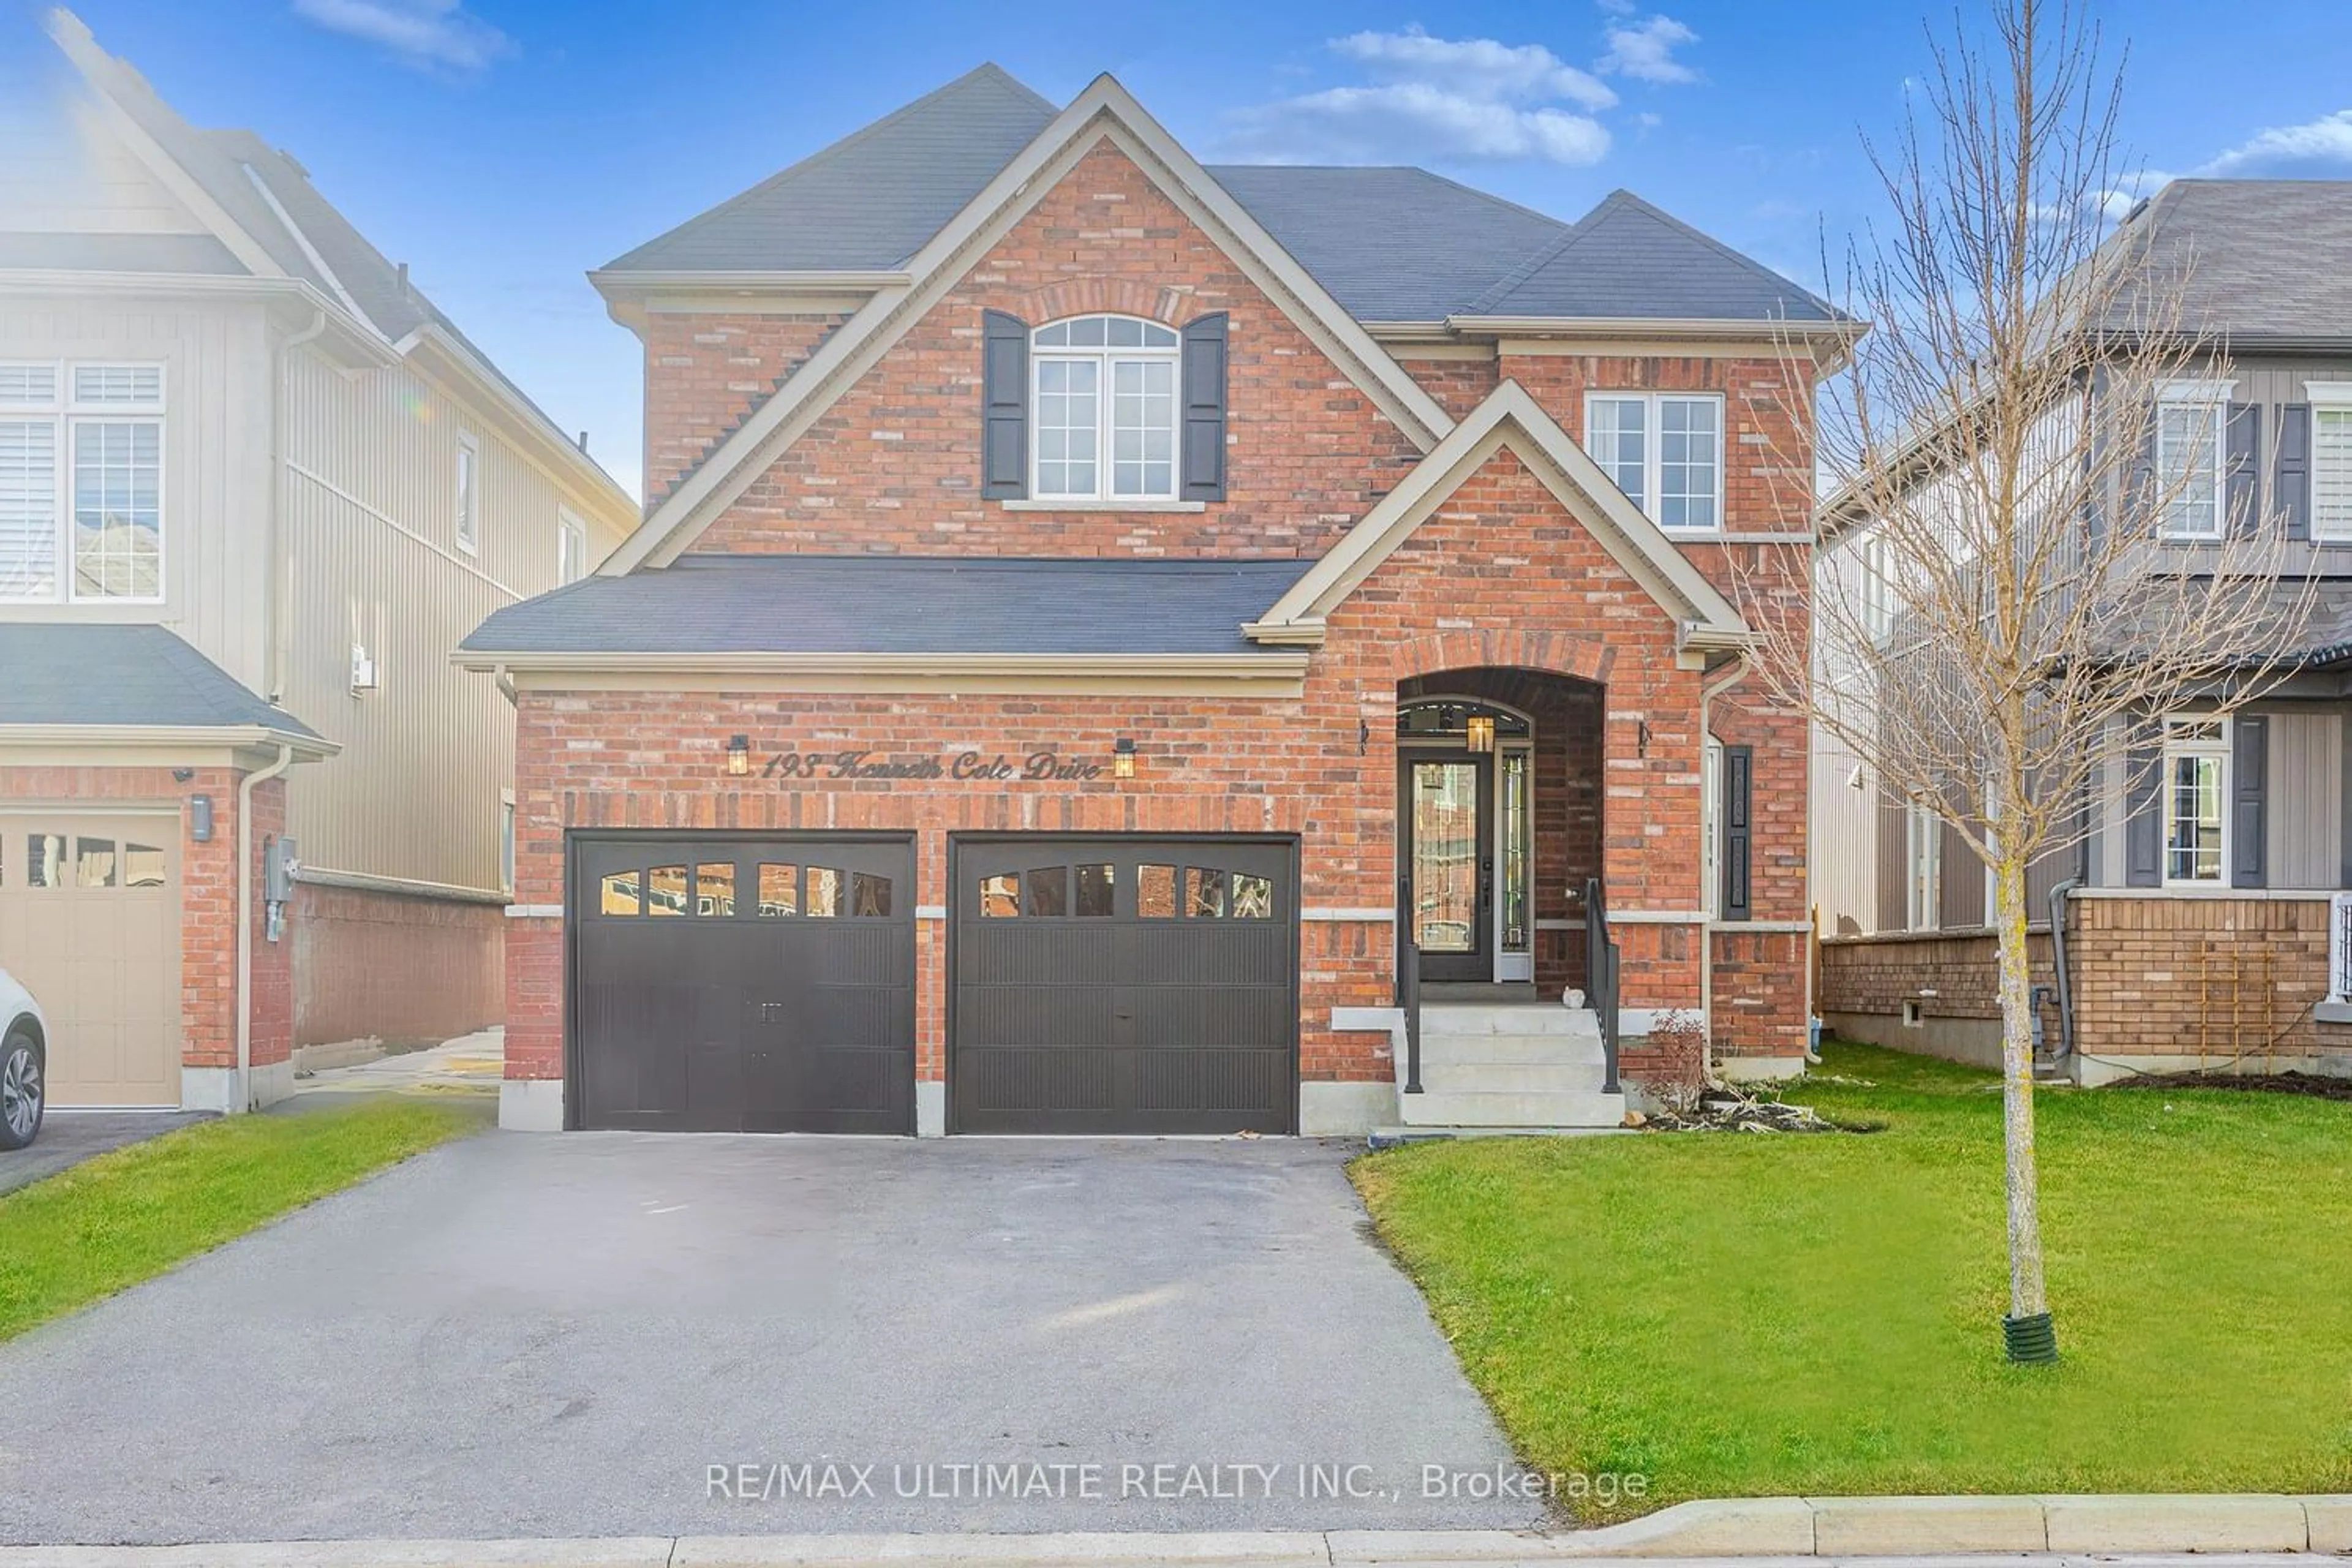 Home with brick exterior material for 193 Kenneth Cole Dr, Clarington Ontario L1C 0S6